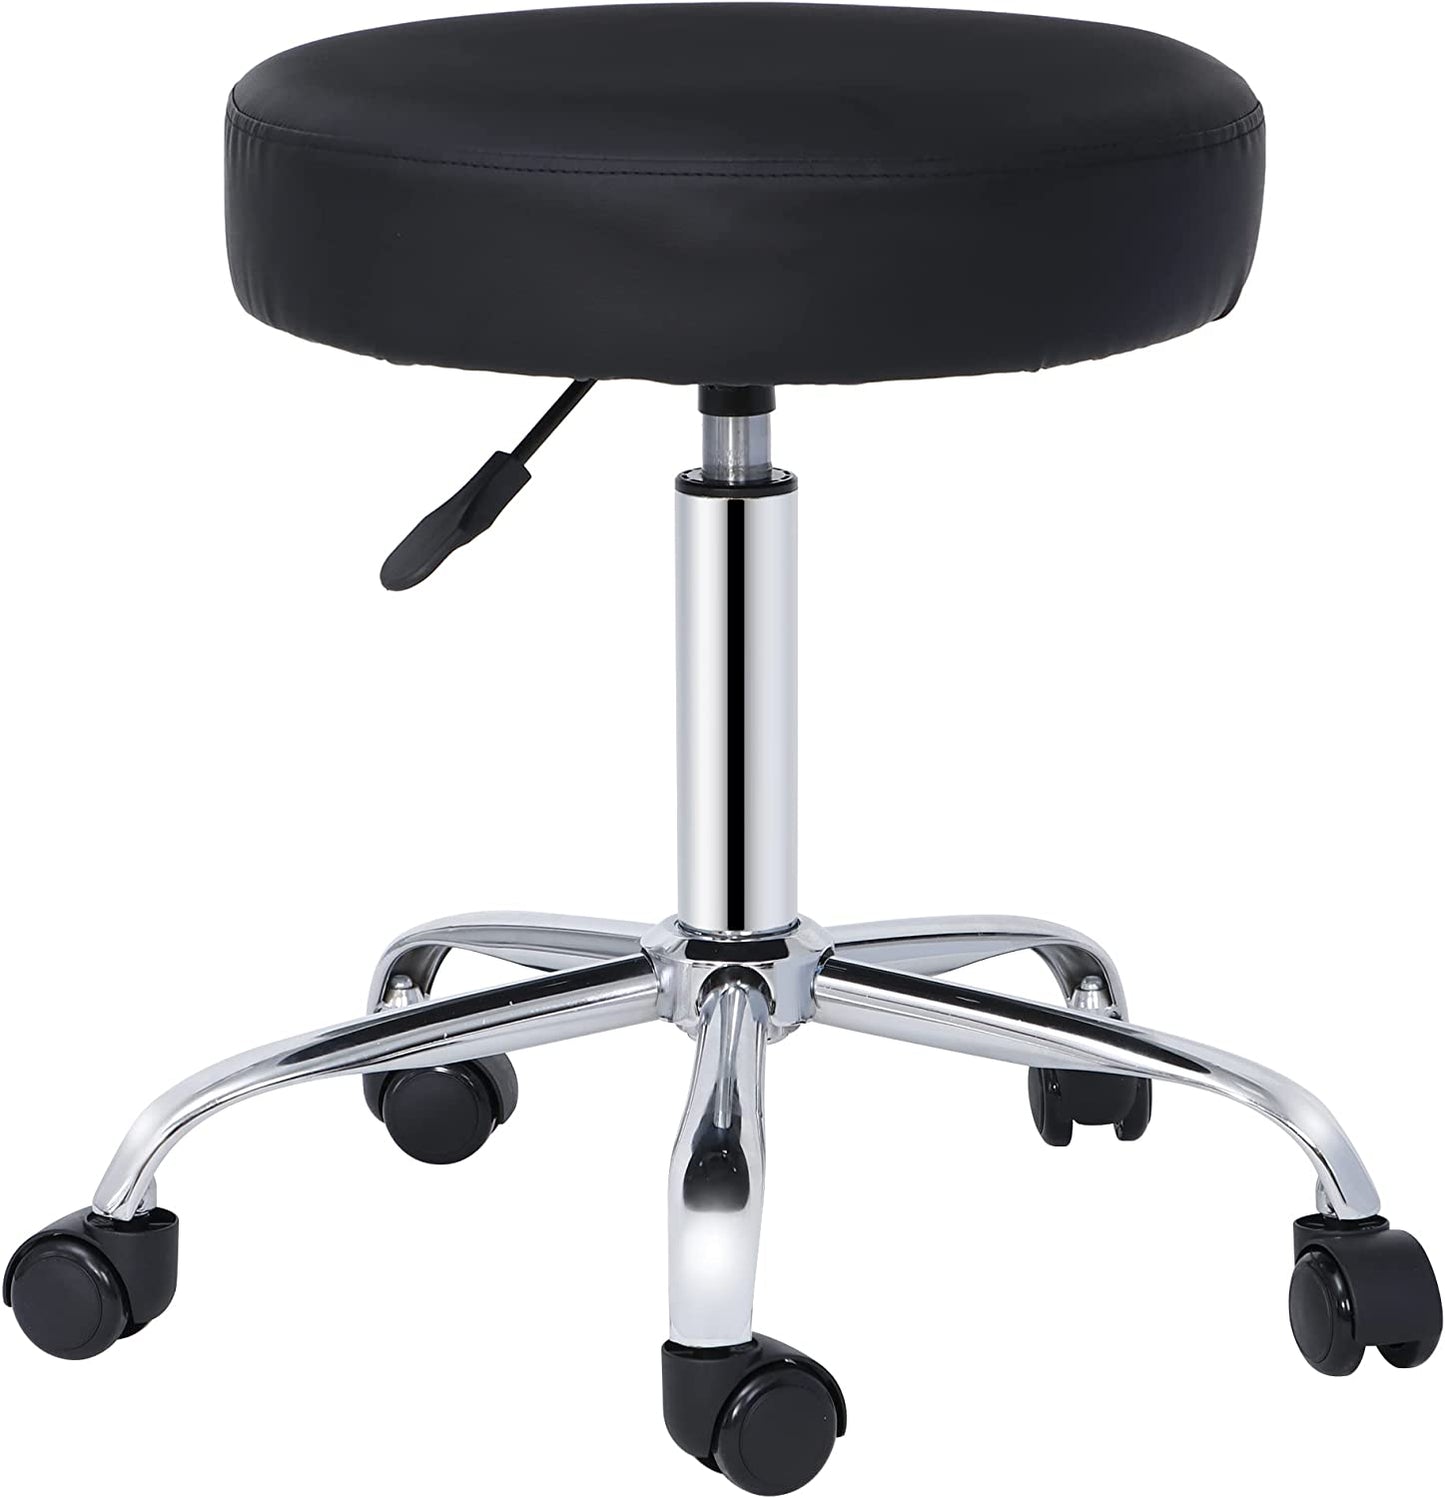 Adjustable Rolling Stool Chair Salon Spa Stool Hydraulic Swivel Stool with Wheels and Ultra-Thick Seat Cushion Beauty Massage Tattoo Medical Drafting Office Stool Task Chair, Black